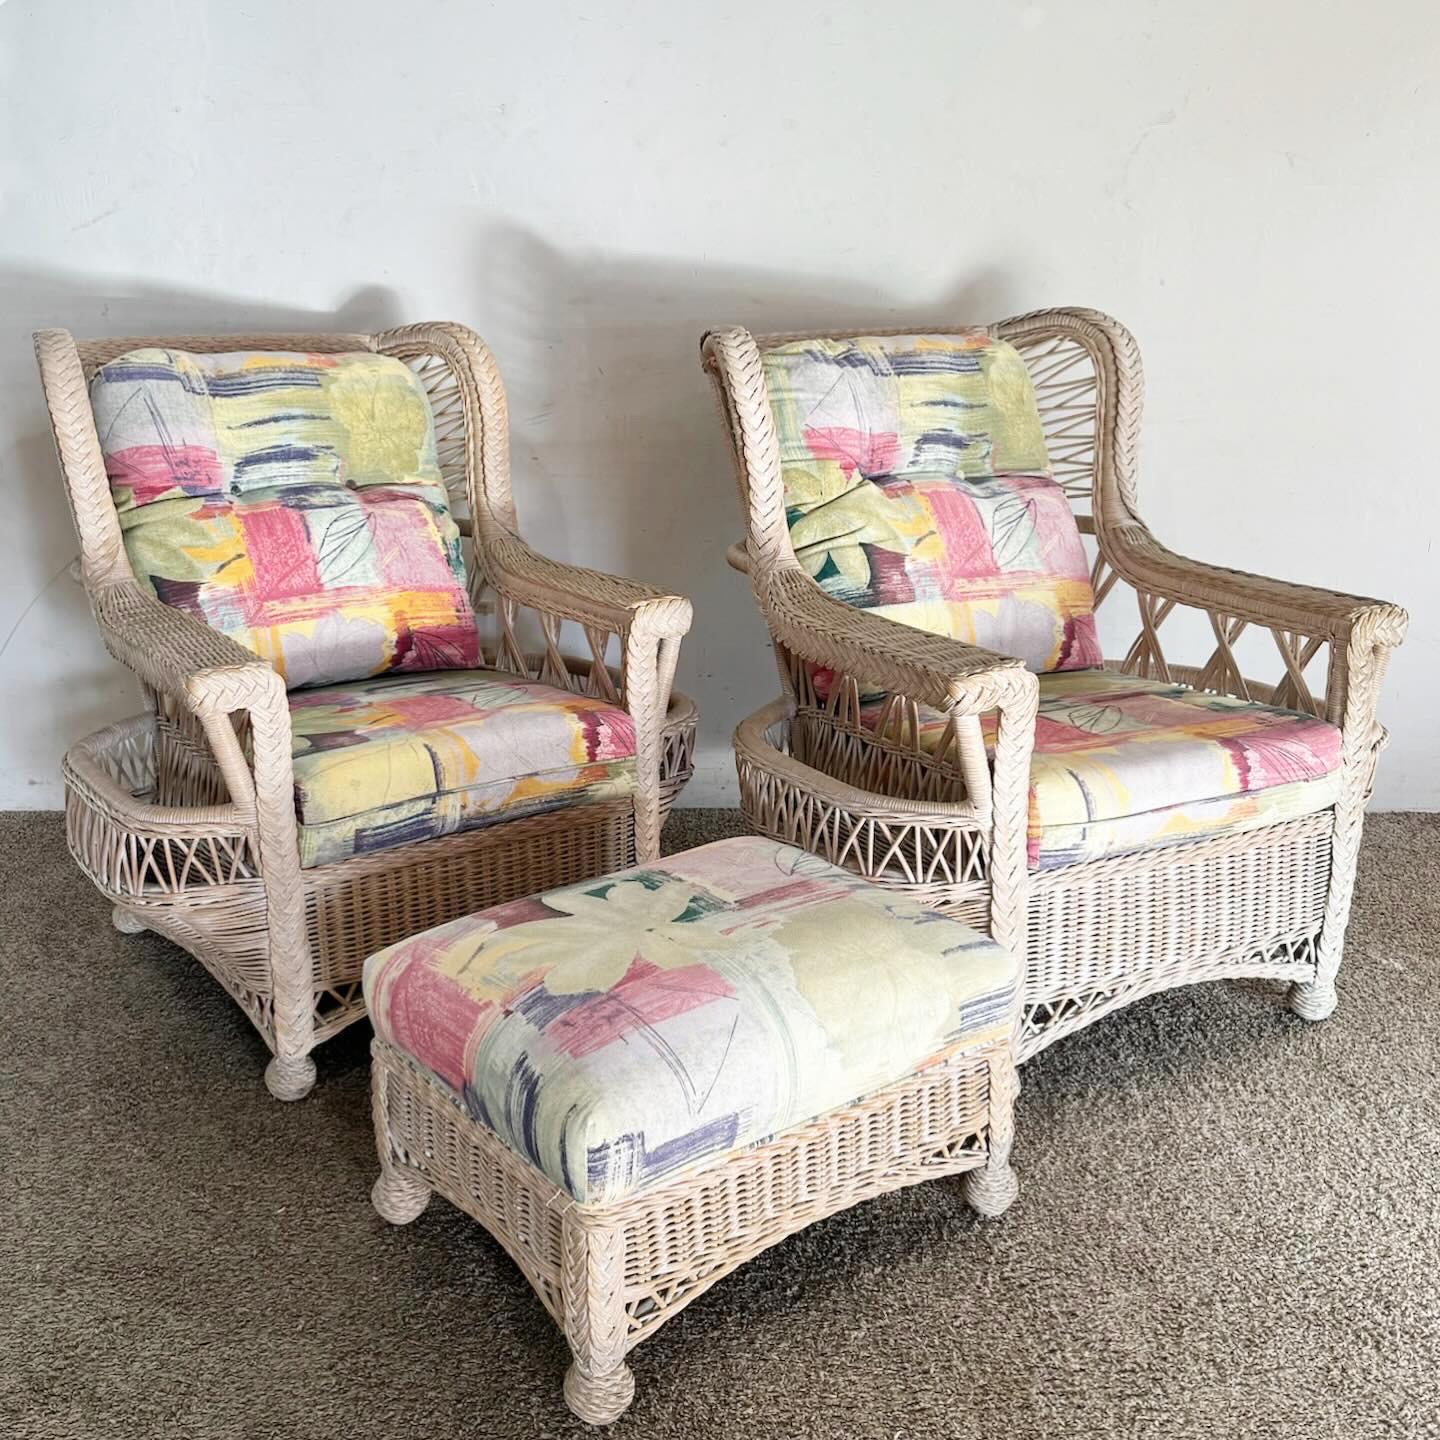 The Boho Chic Wicker Rattan Lounge Chairs with Ottoman set, comprising 3 pieces, offers relaxed elegance for your space. Including two lounge chairs and a matching ottoman, made from high-quality wicker and rattan, it promises comfort and style. The